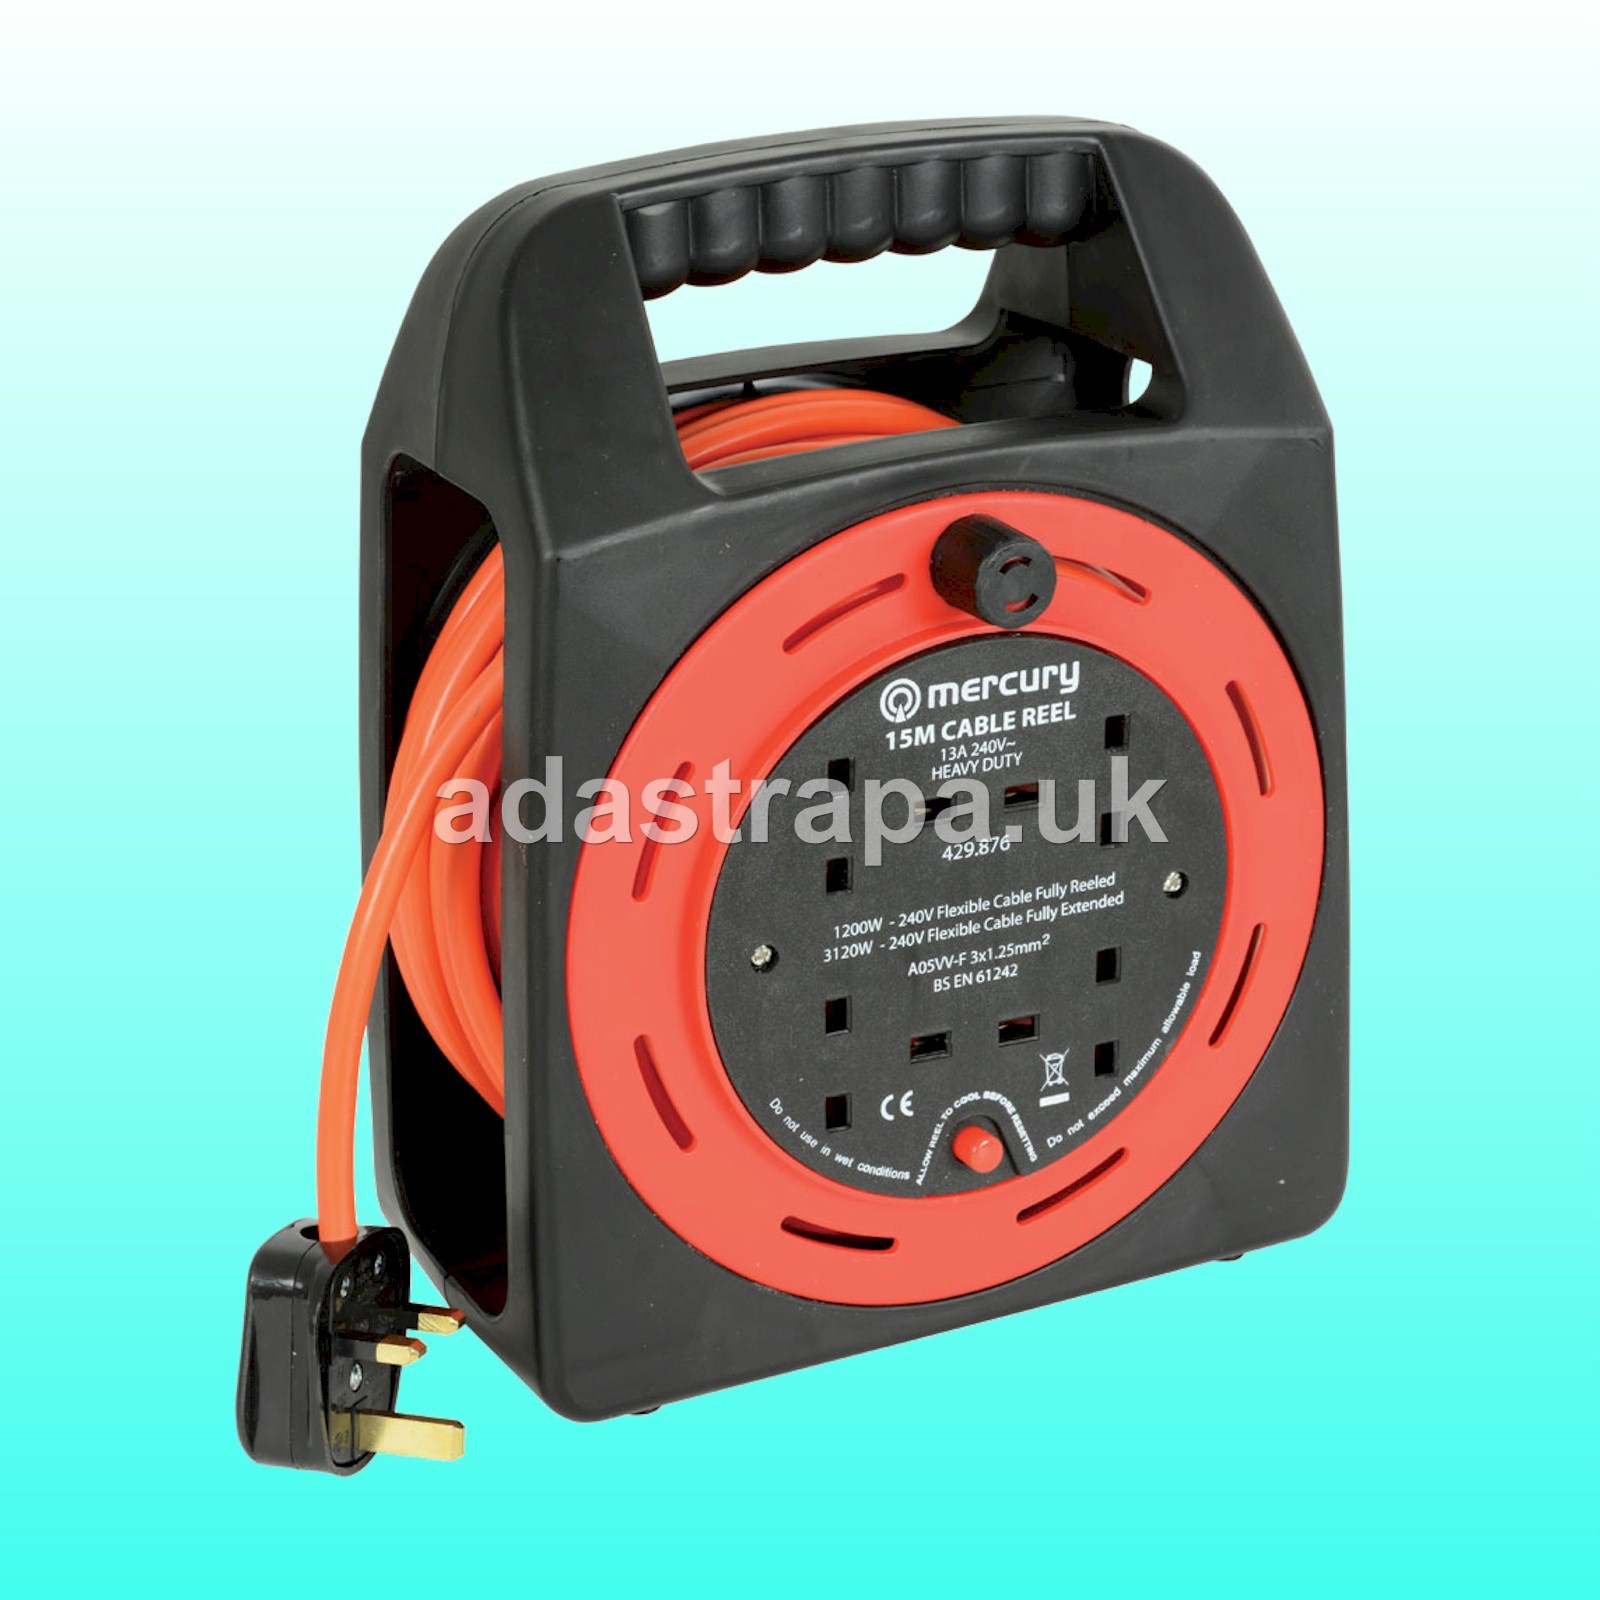 Mercury 429.876UK 13A Mains Extension Reel 4-Gang with Thermal Cut-Out 15M - 429.876UK